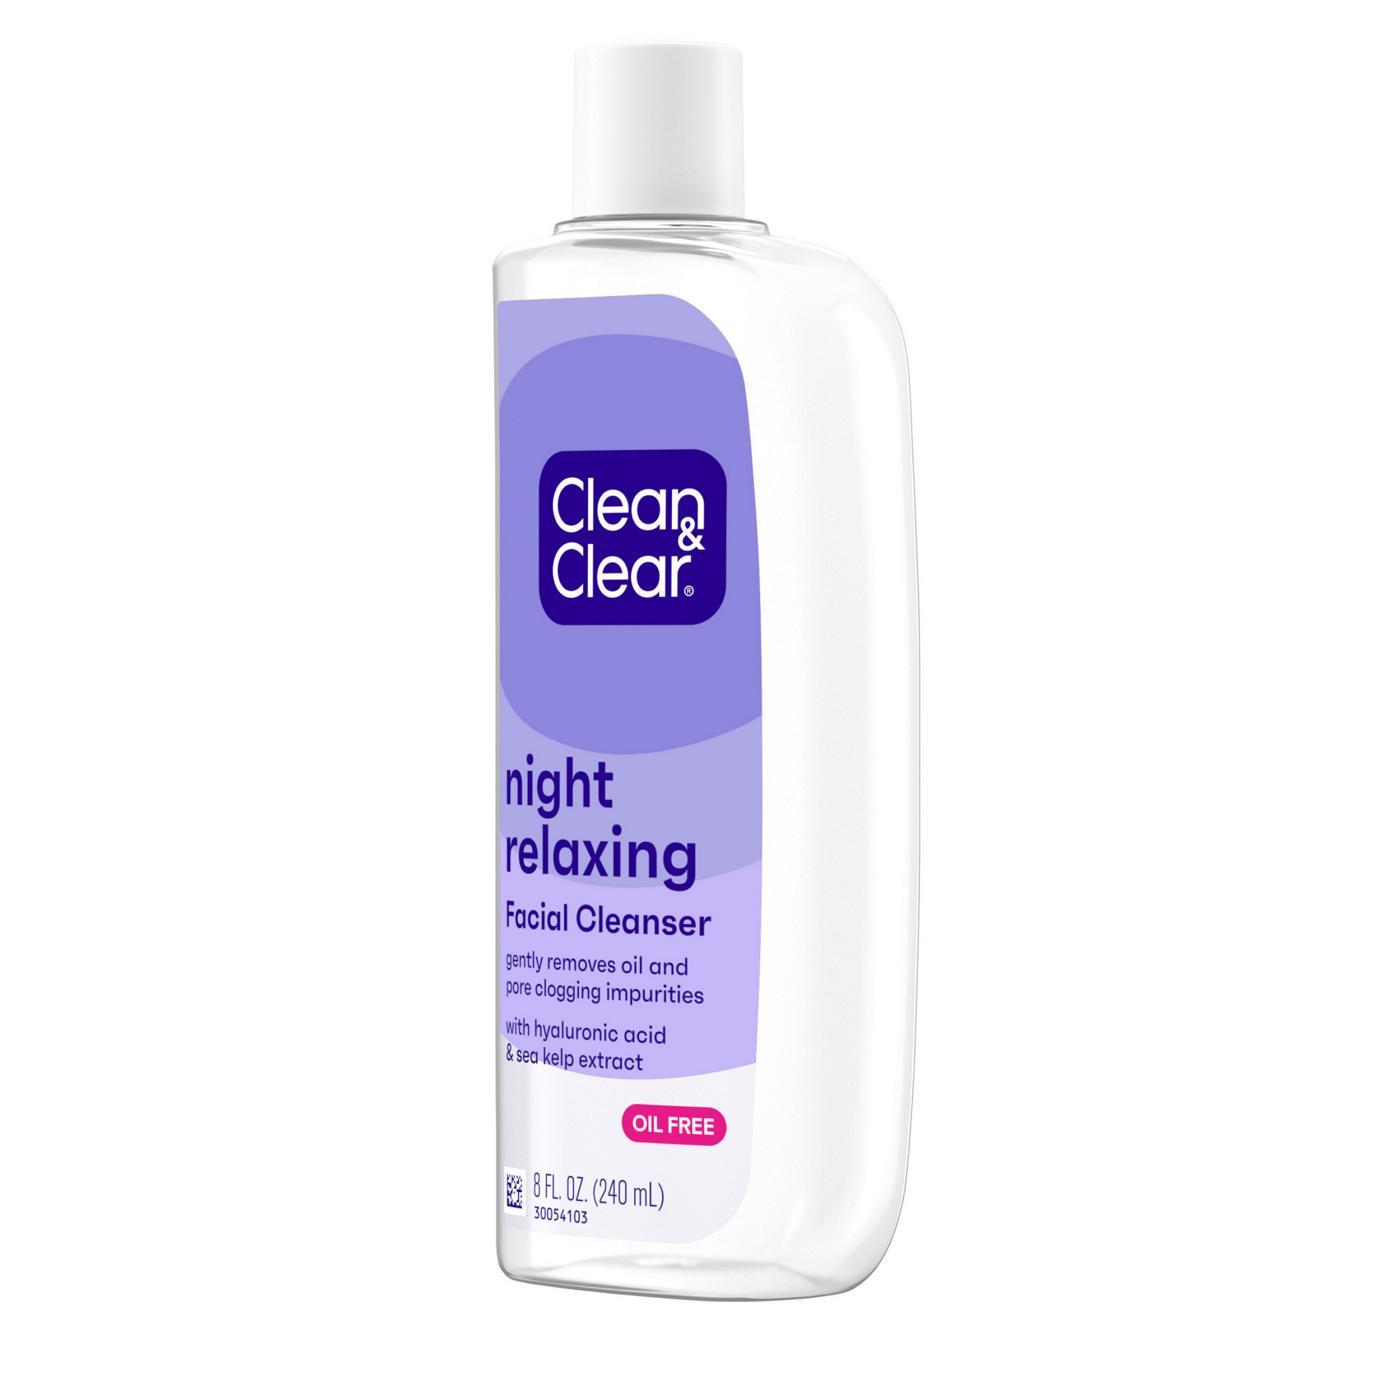 Clean & Clear Night Relaxing Deep Cleaning Face Wash; image 6 of 8